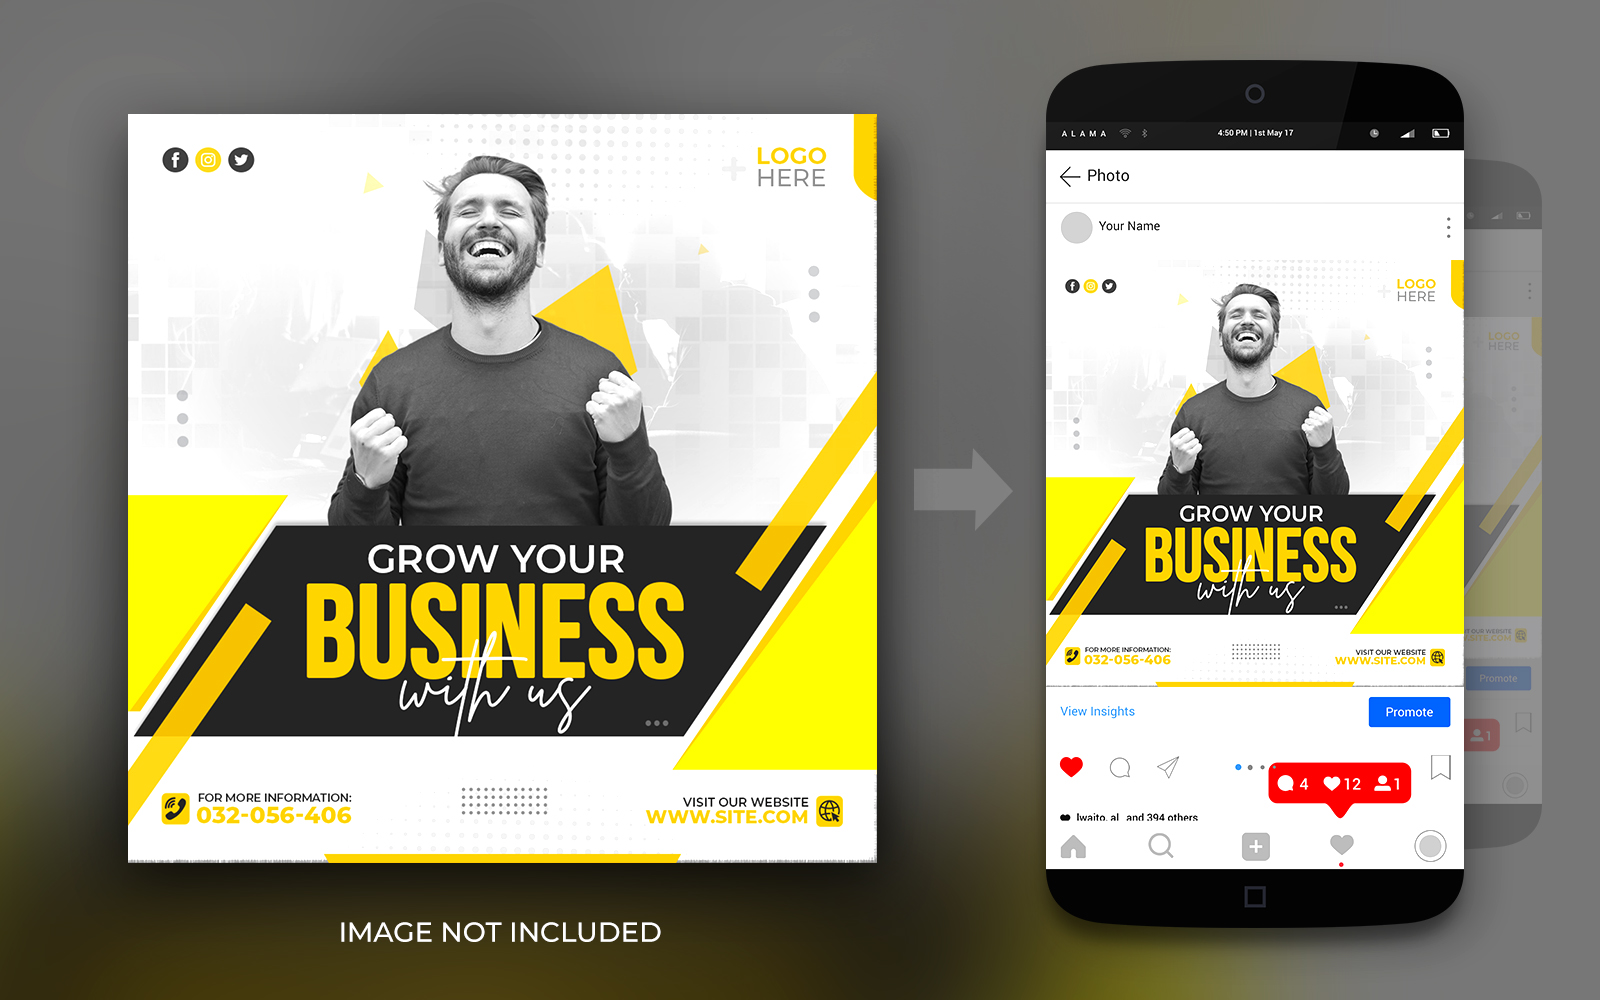 Grow Your Business Marketing Instagram And Facebook Corporate Social Media Post Design Template